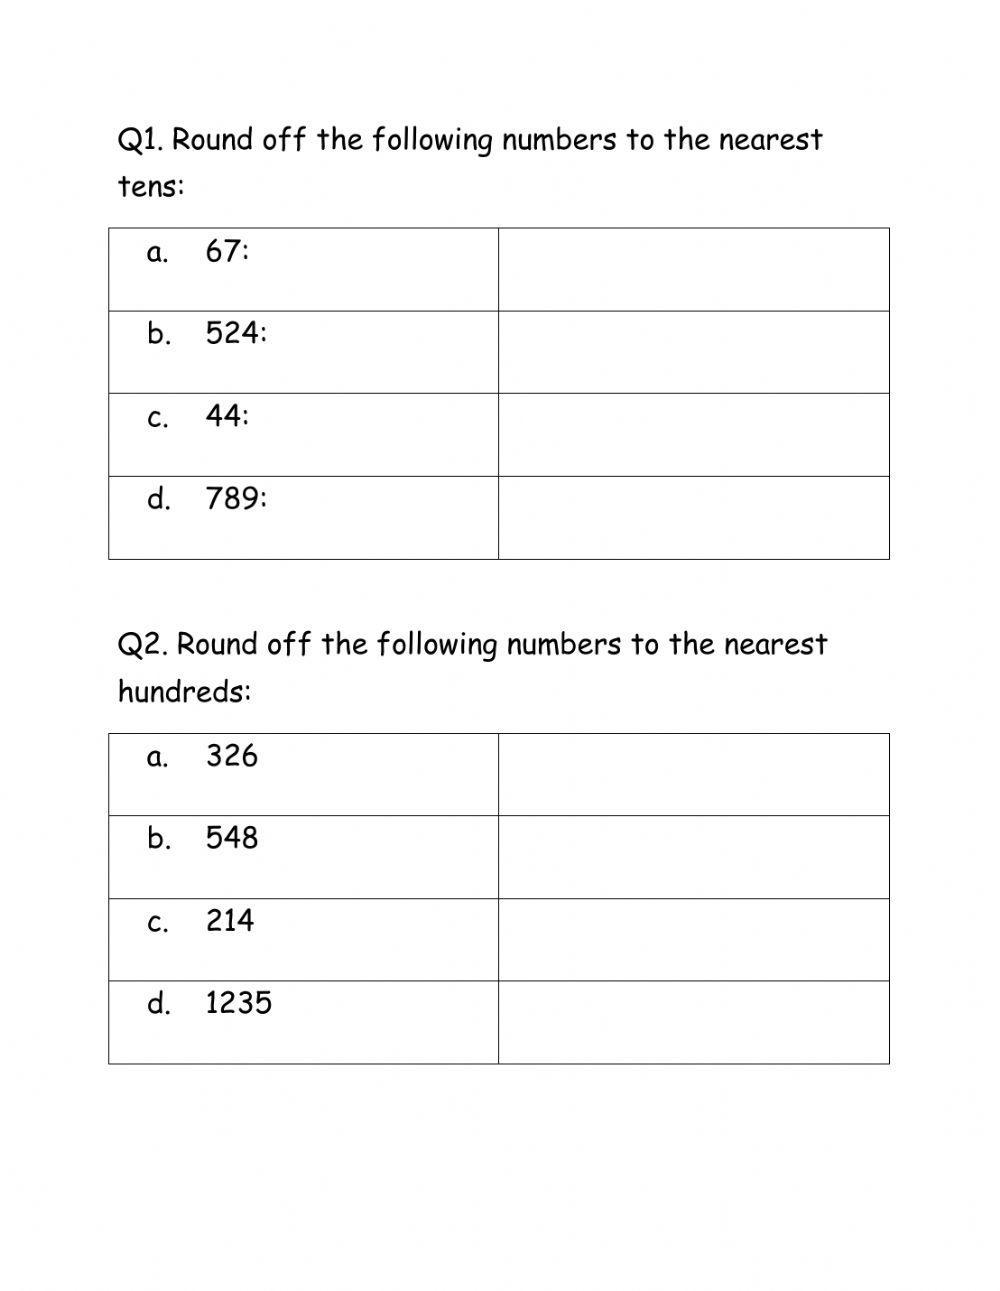 Rounding to the Nearest 10 and 100 Review Worksheets